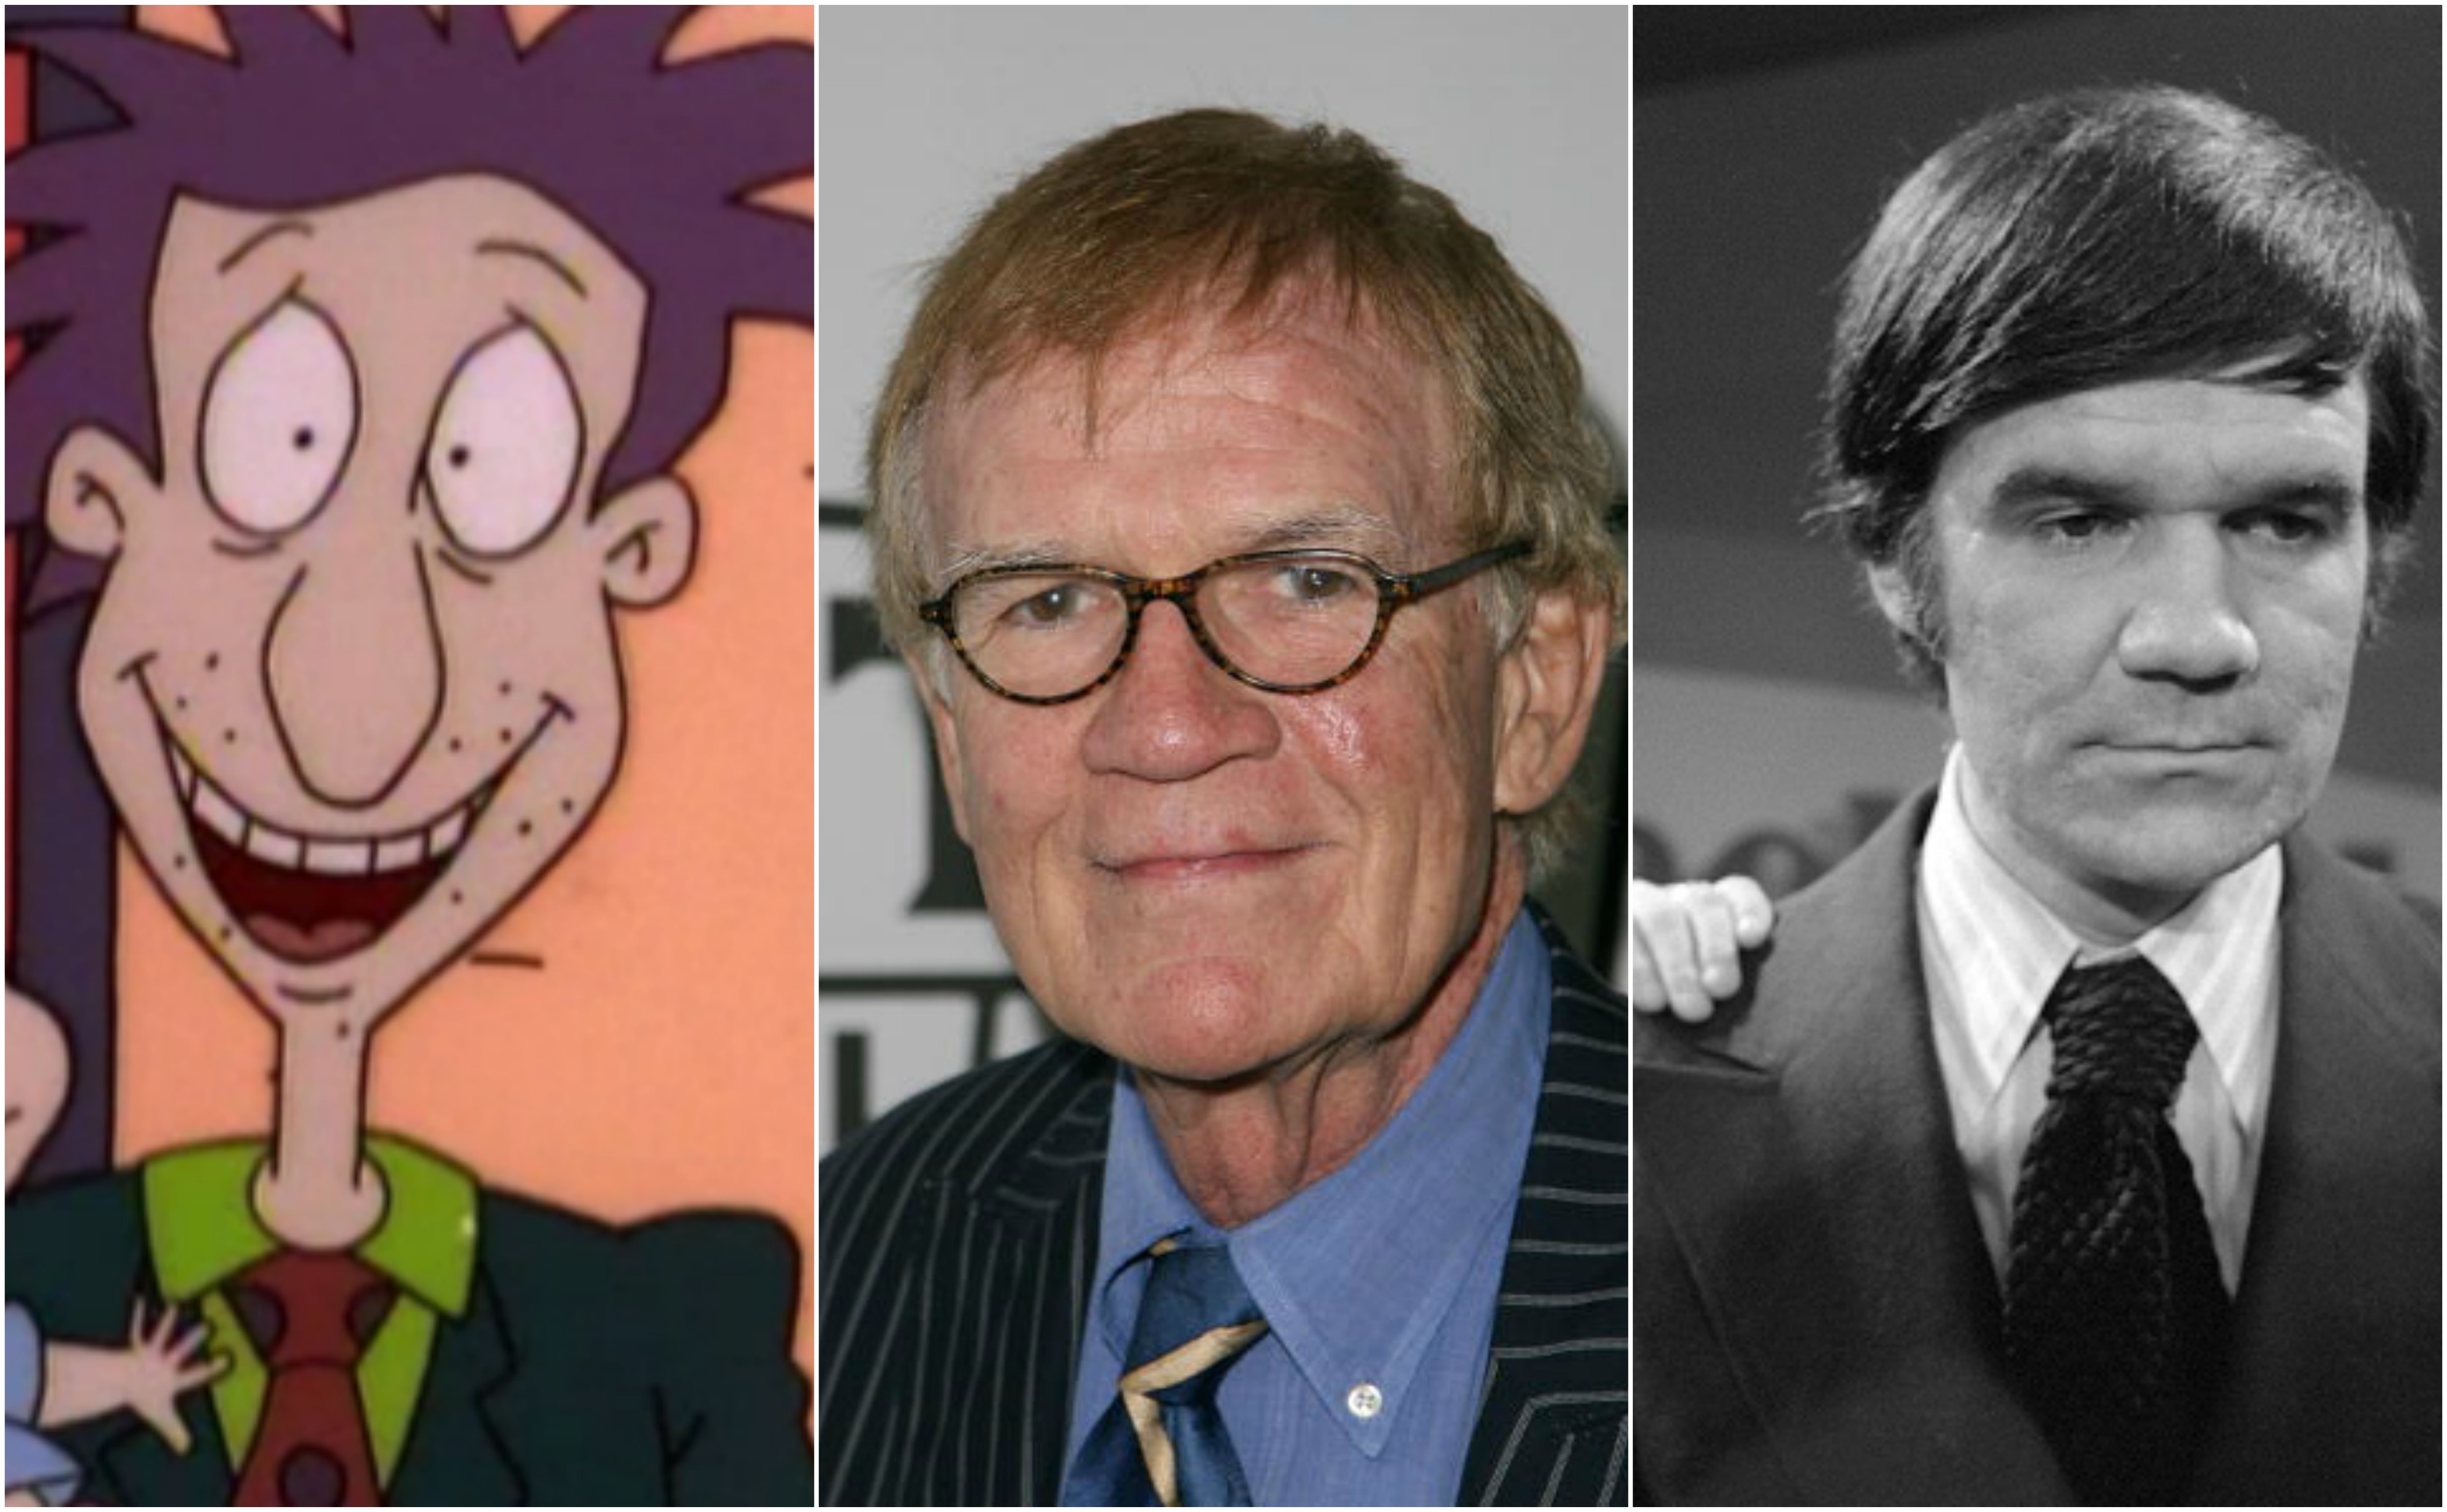 Jack Riley Bob Newhart Show Regular And Voice Of Stu Pickles On Rugrats Dies At 80